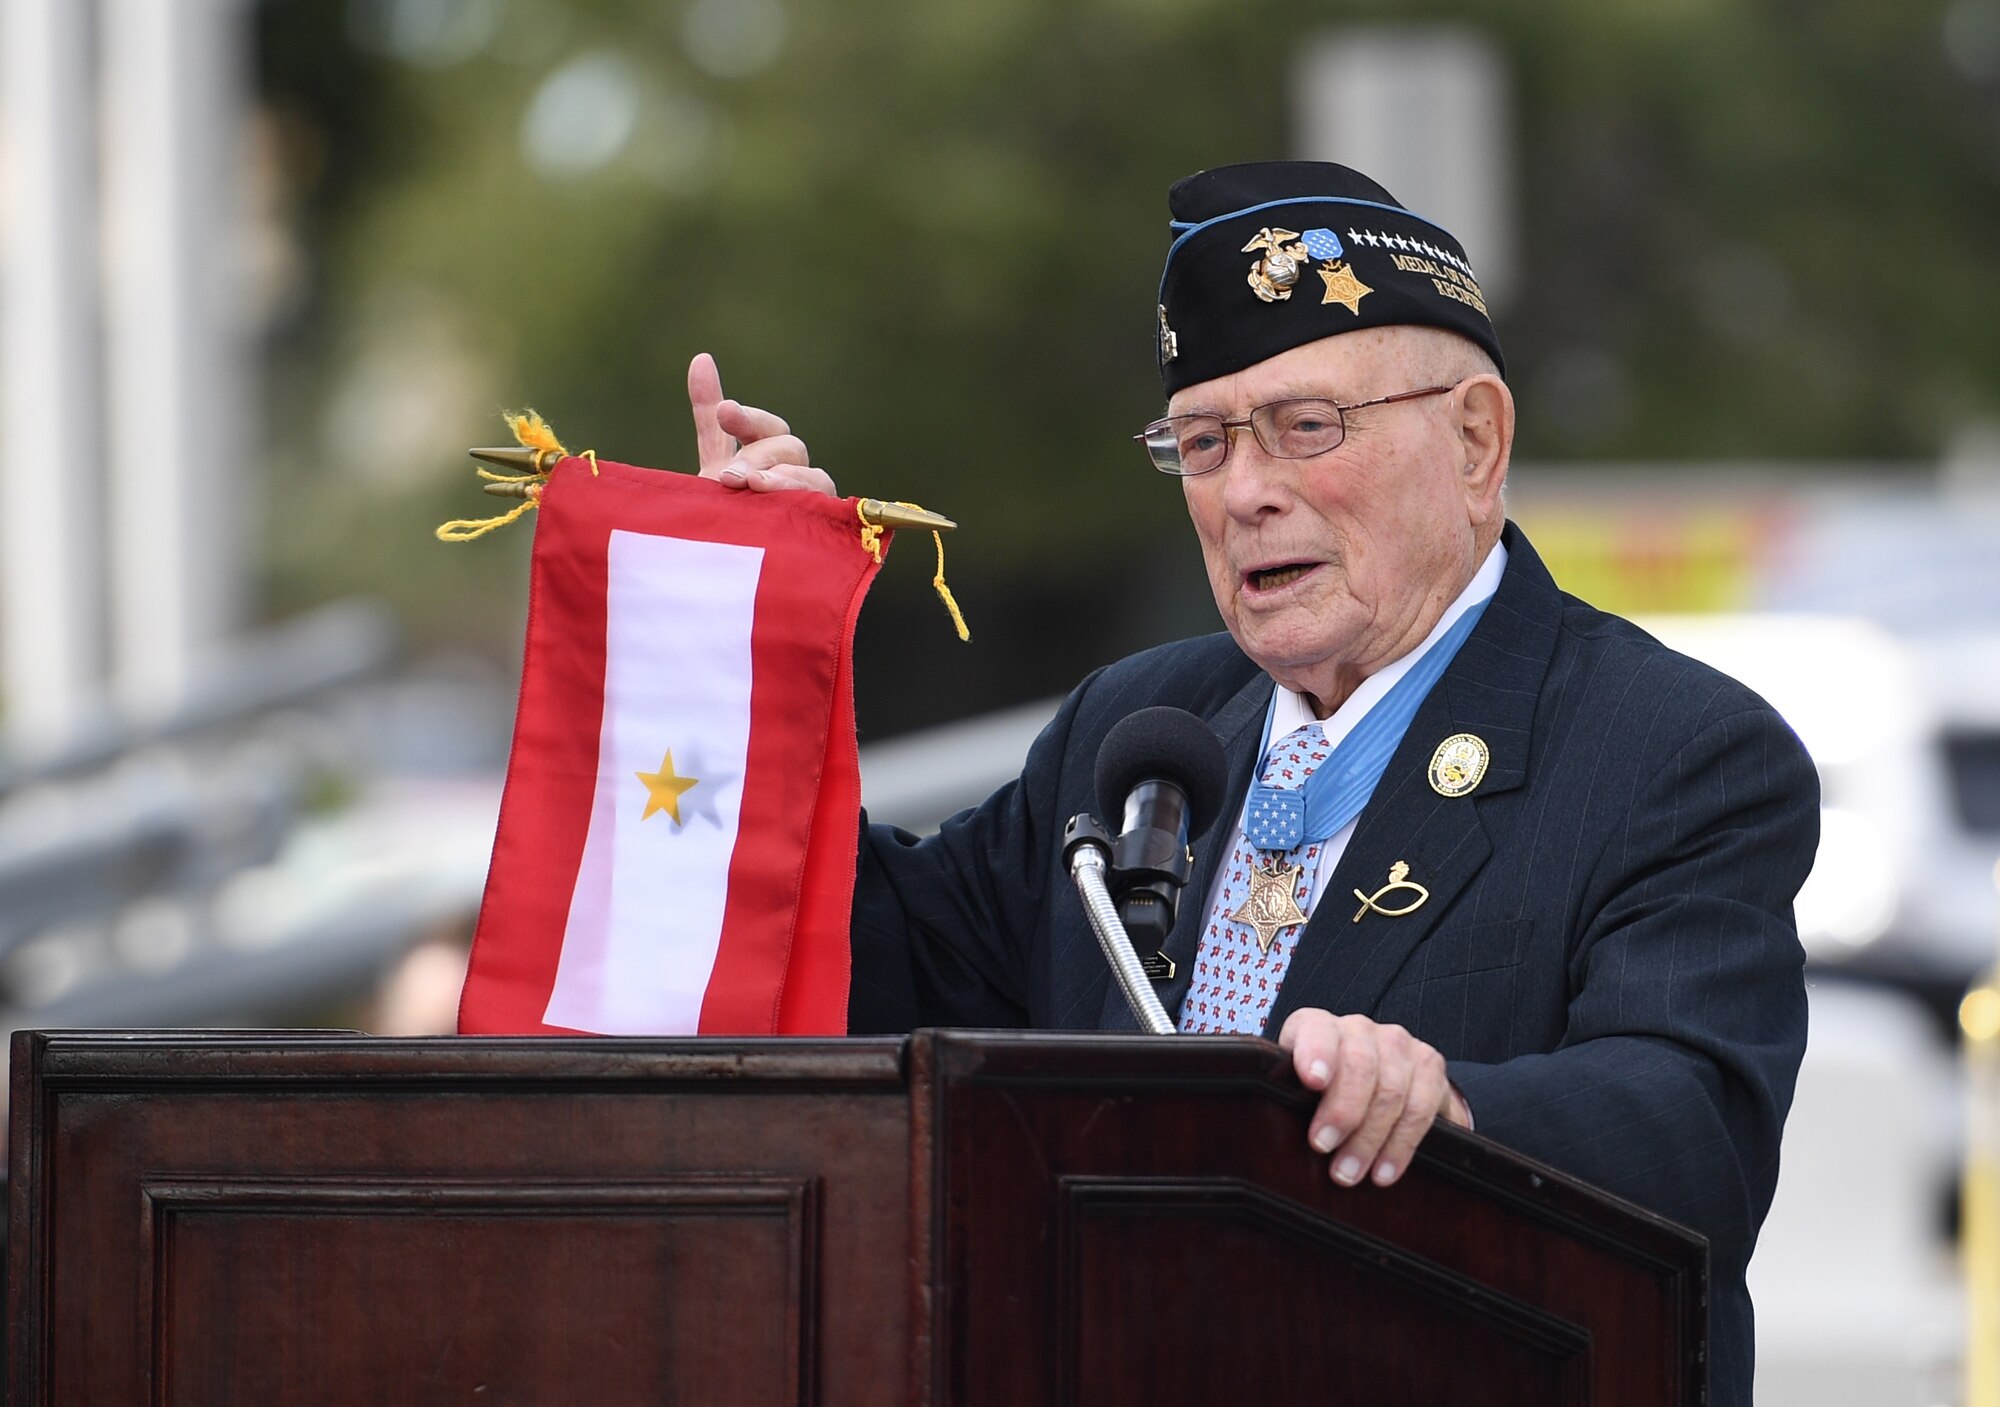 U.S. Marine retired Warrant Officer Hershel "Woody" Williams, World War II Medal of Honor recipient, delivers remarks during the Gold Star Families Memorial Monument dedication ceremony at Guice Veterans Memorial Park in Biloxi, Mississippi, Nov. 23, 2019. The monument honors families of service men and women who sacrificed their lives while serving in the military. (U.S. Air Force photo by Kemberly Groue)